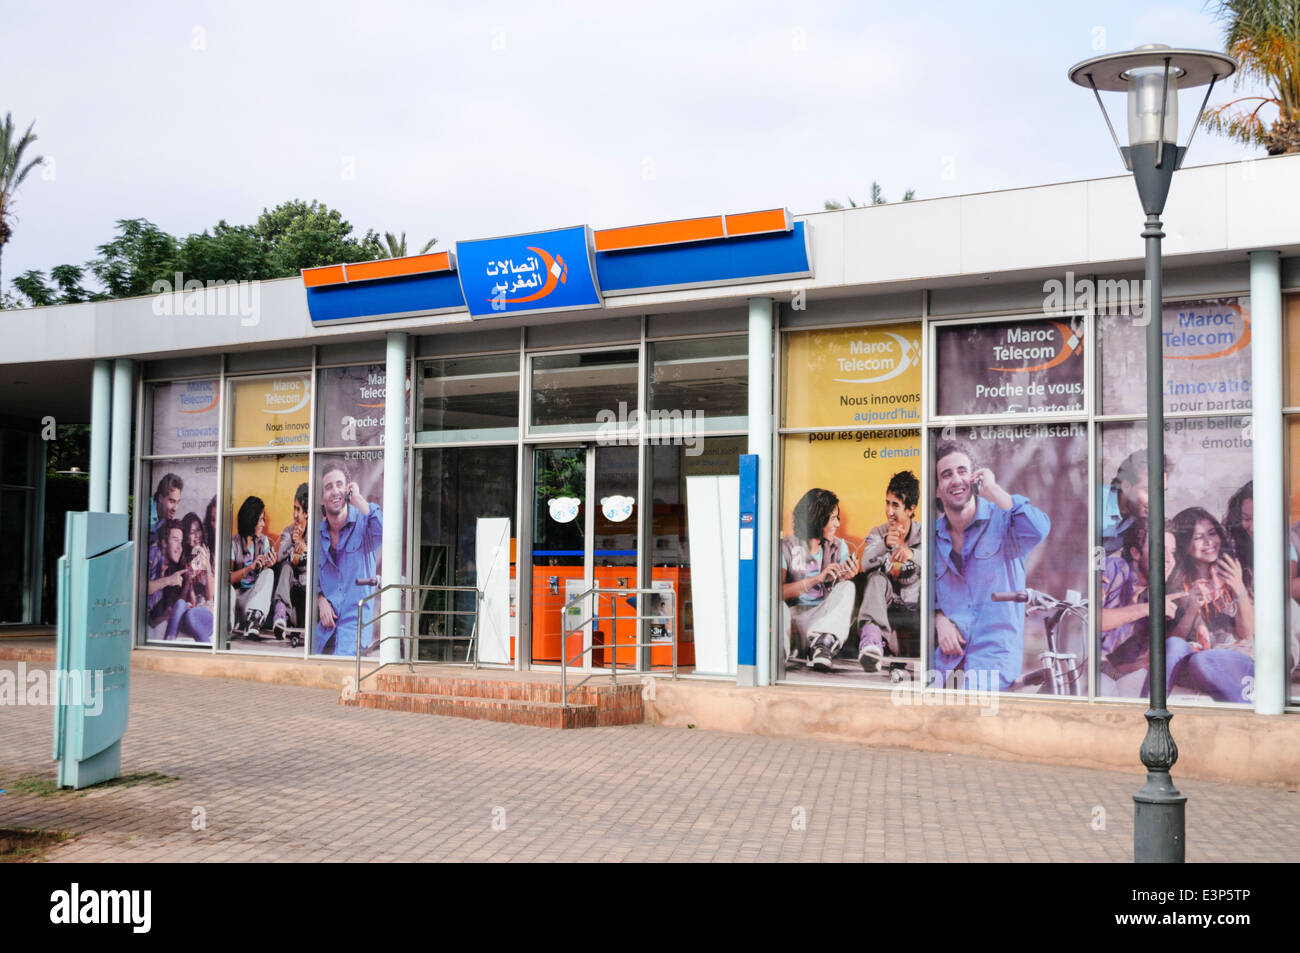 Maroc Telecom shop at the Cyber Parc Arsat Moulay Abeslam, Marrakech, Morocco Stock Photo